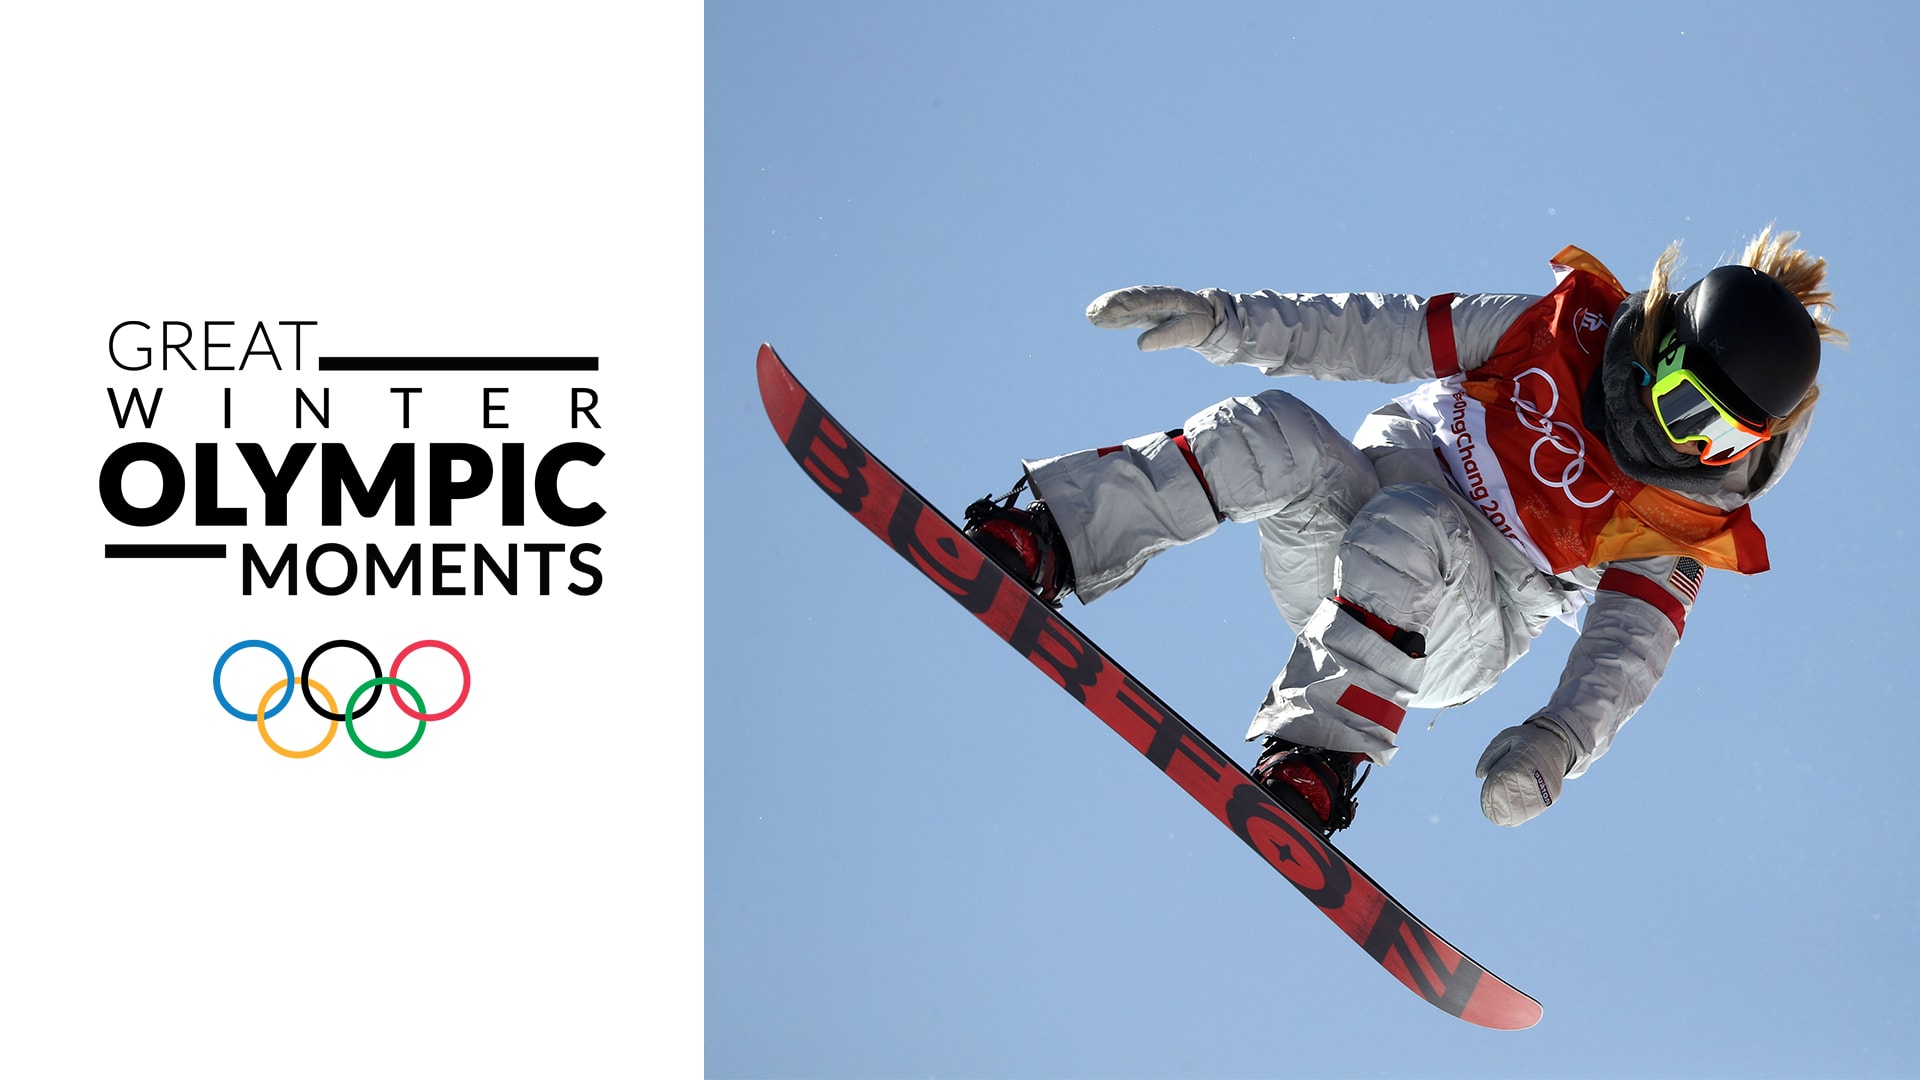 Olympic snowboard at Beijing 2022: five things to know